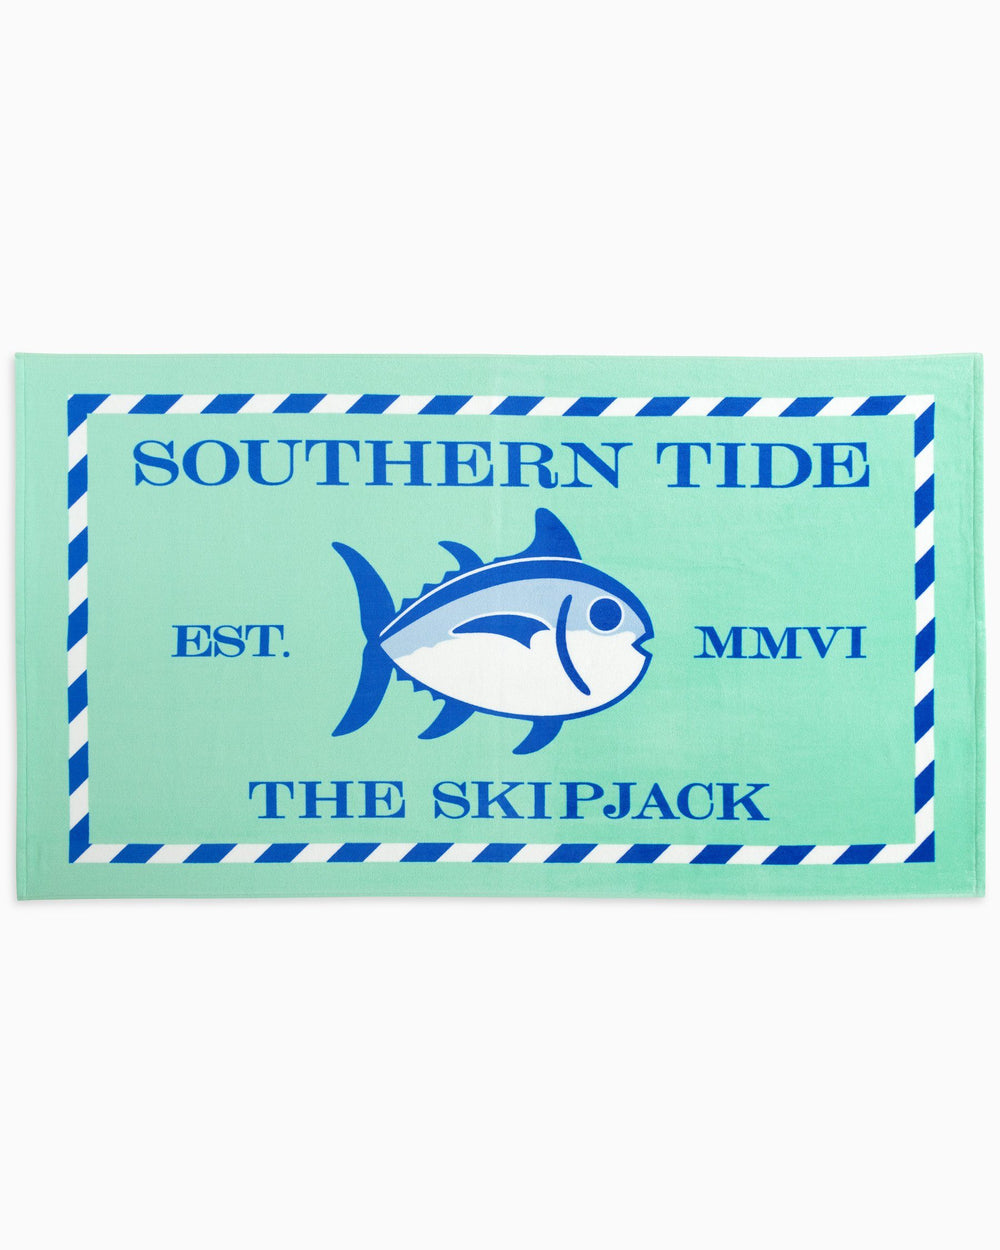 The front view of the Skipjack Beach Towel by Southern Tide - Offshore Green